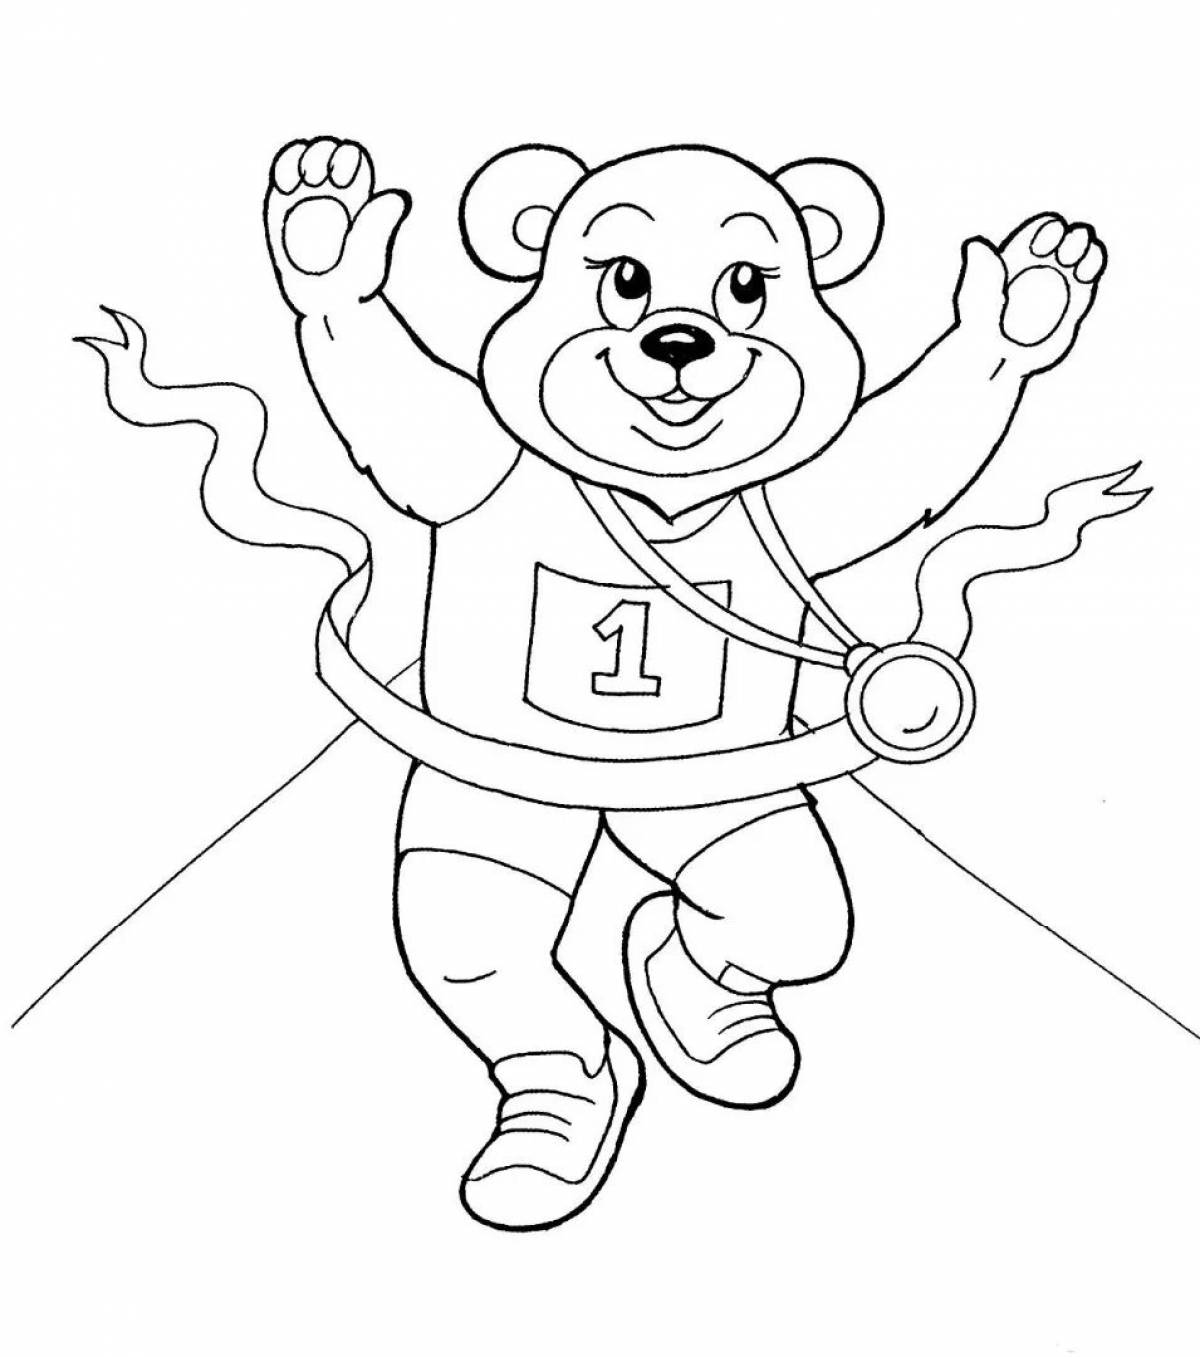 Innovative olympic games coloring book for kids